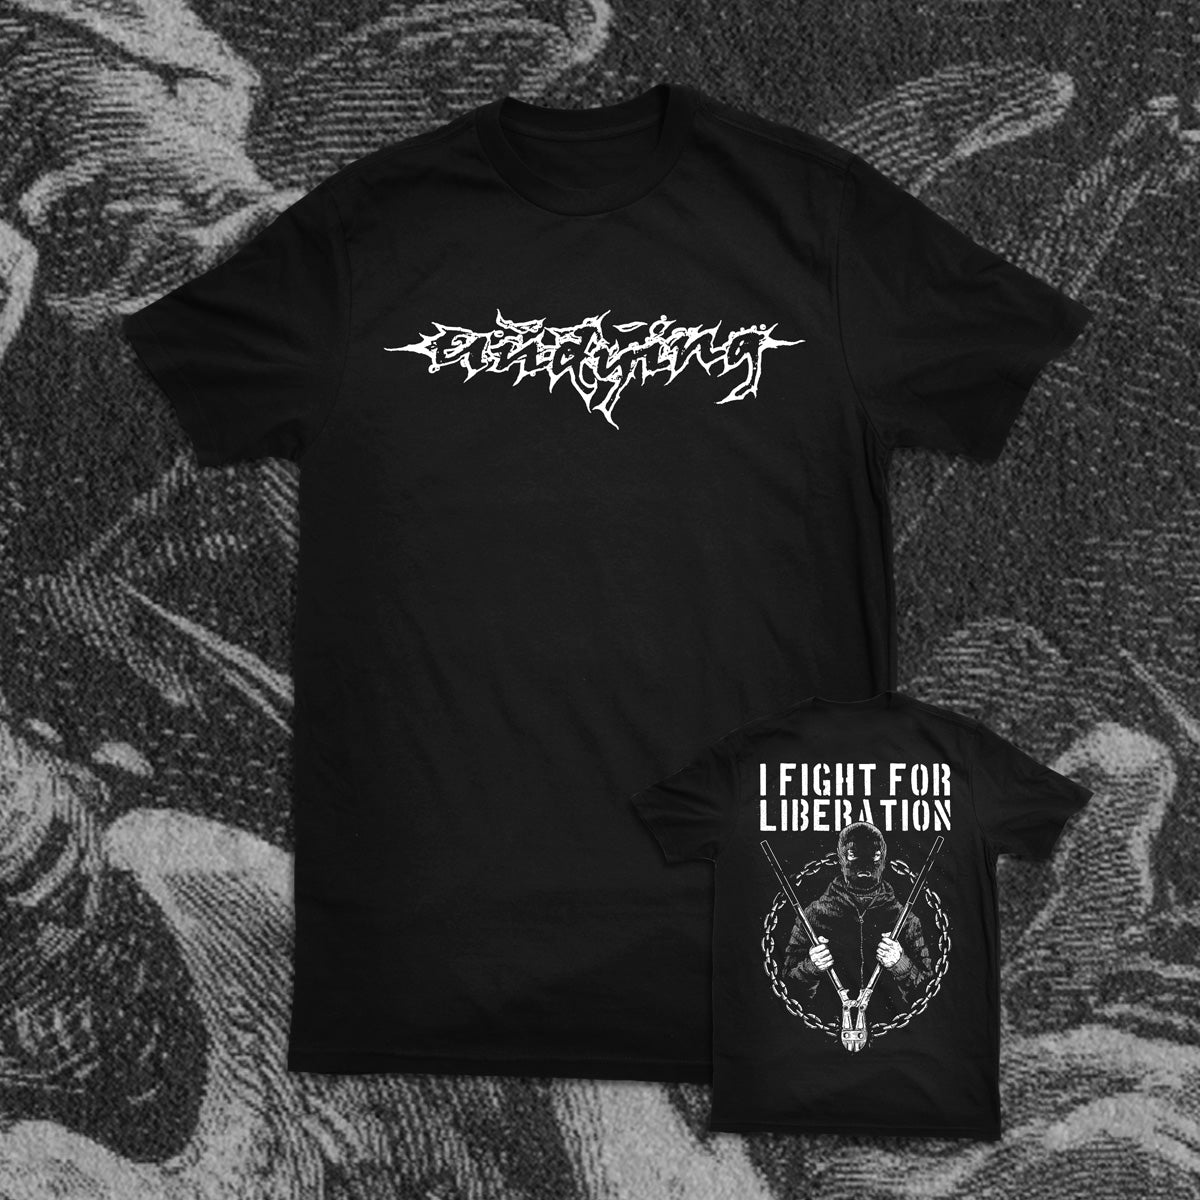 UNDYING "FOR LIBERATION" SHIRT